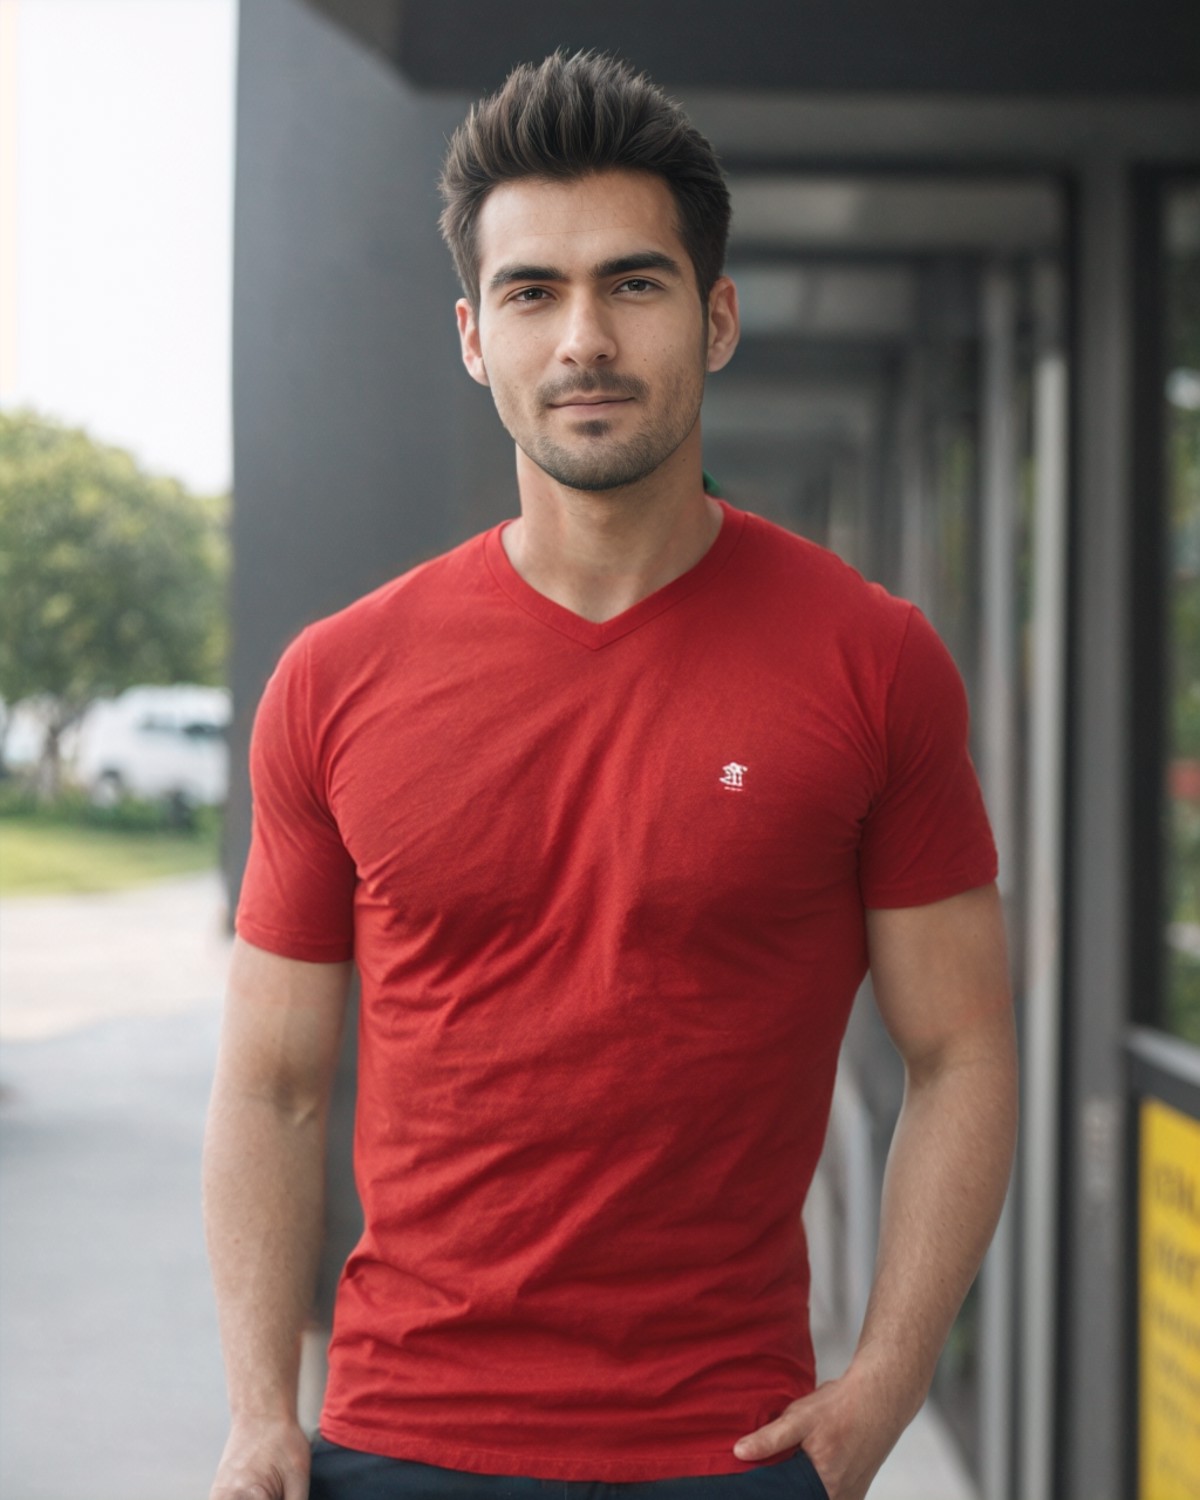 A perfect photograph of a man wearing a red shirt